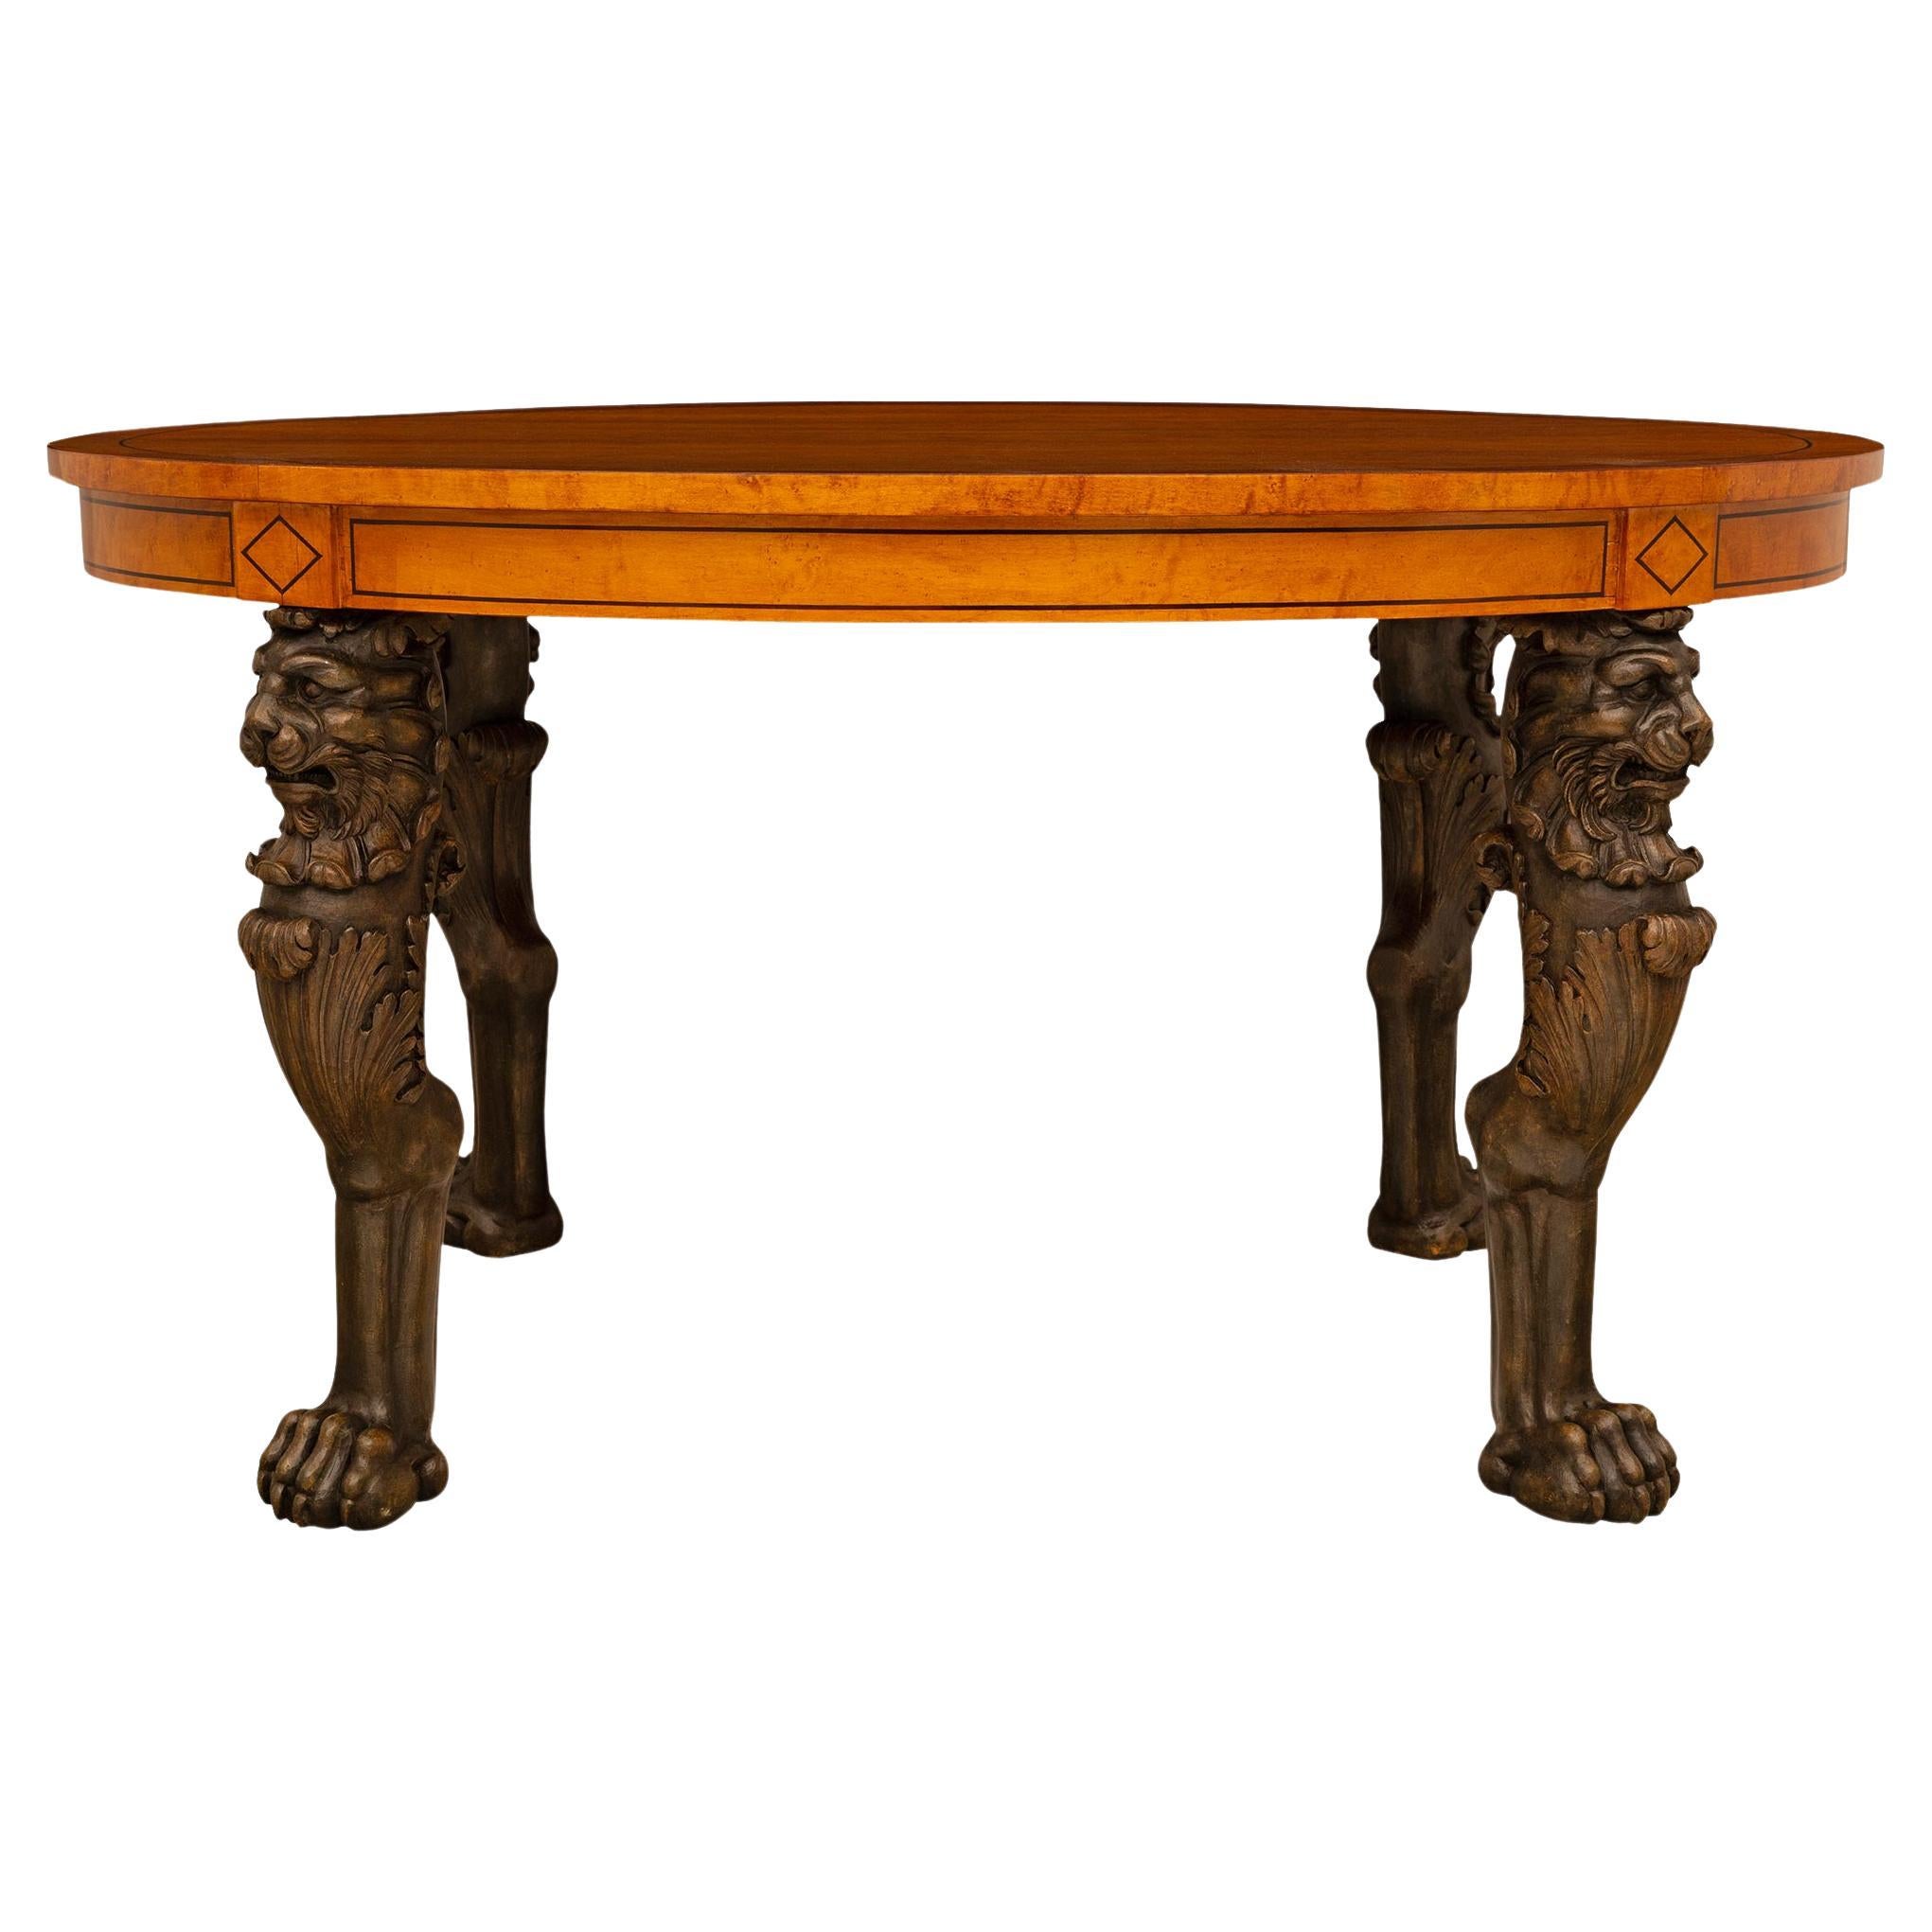 French 19th century Empire st. Lemon and patinated wood center table